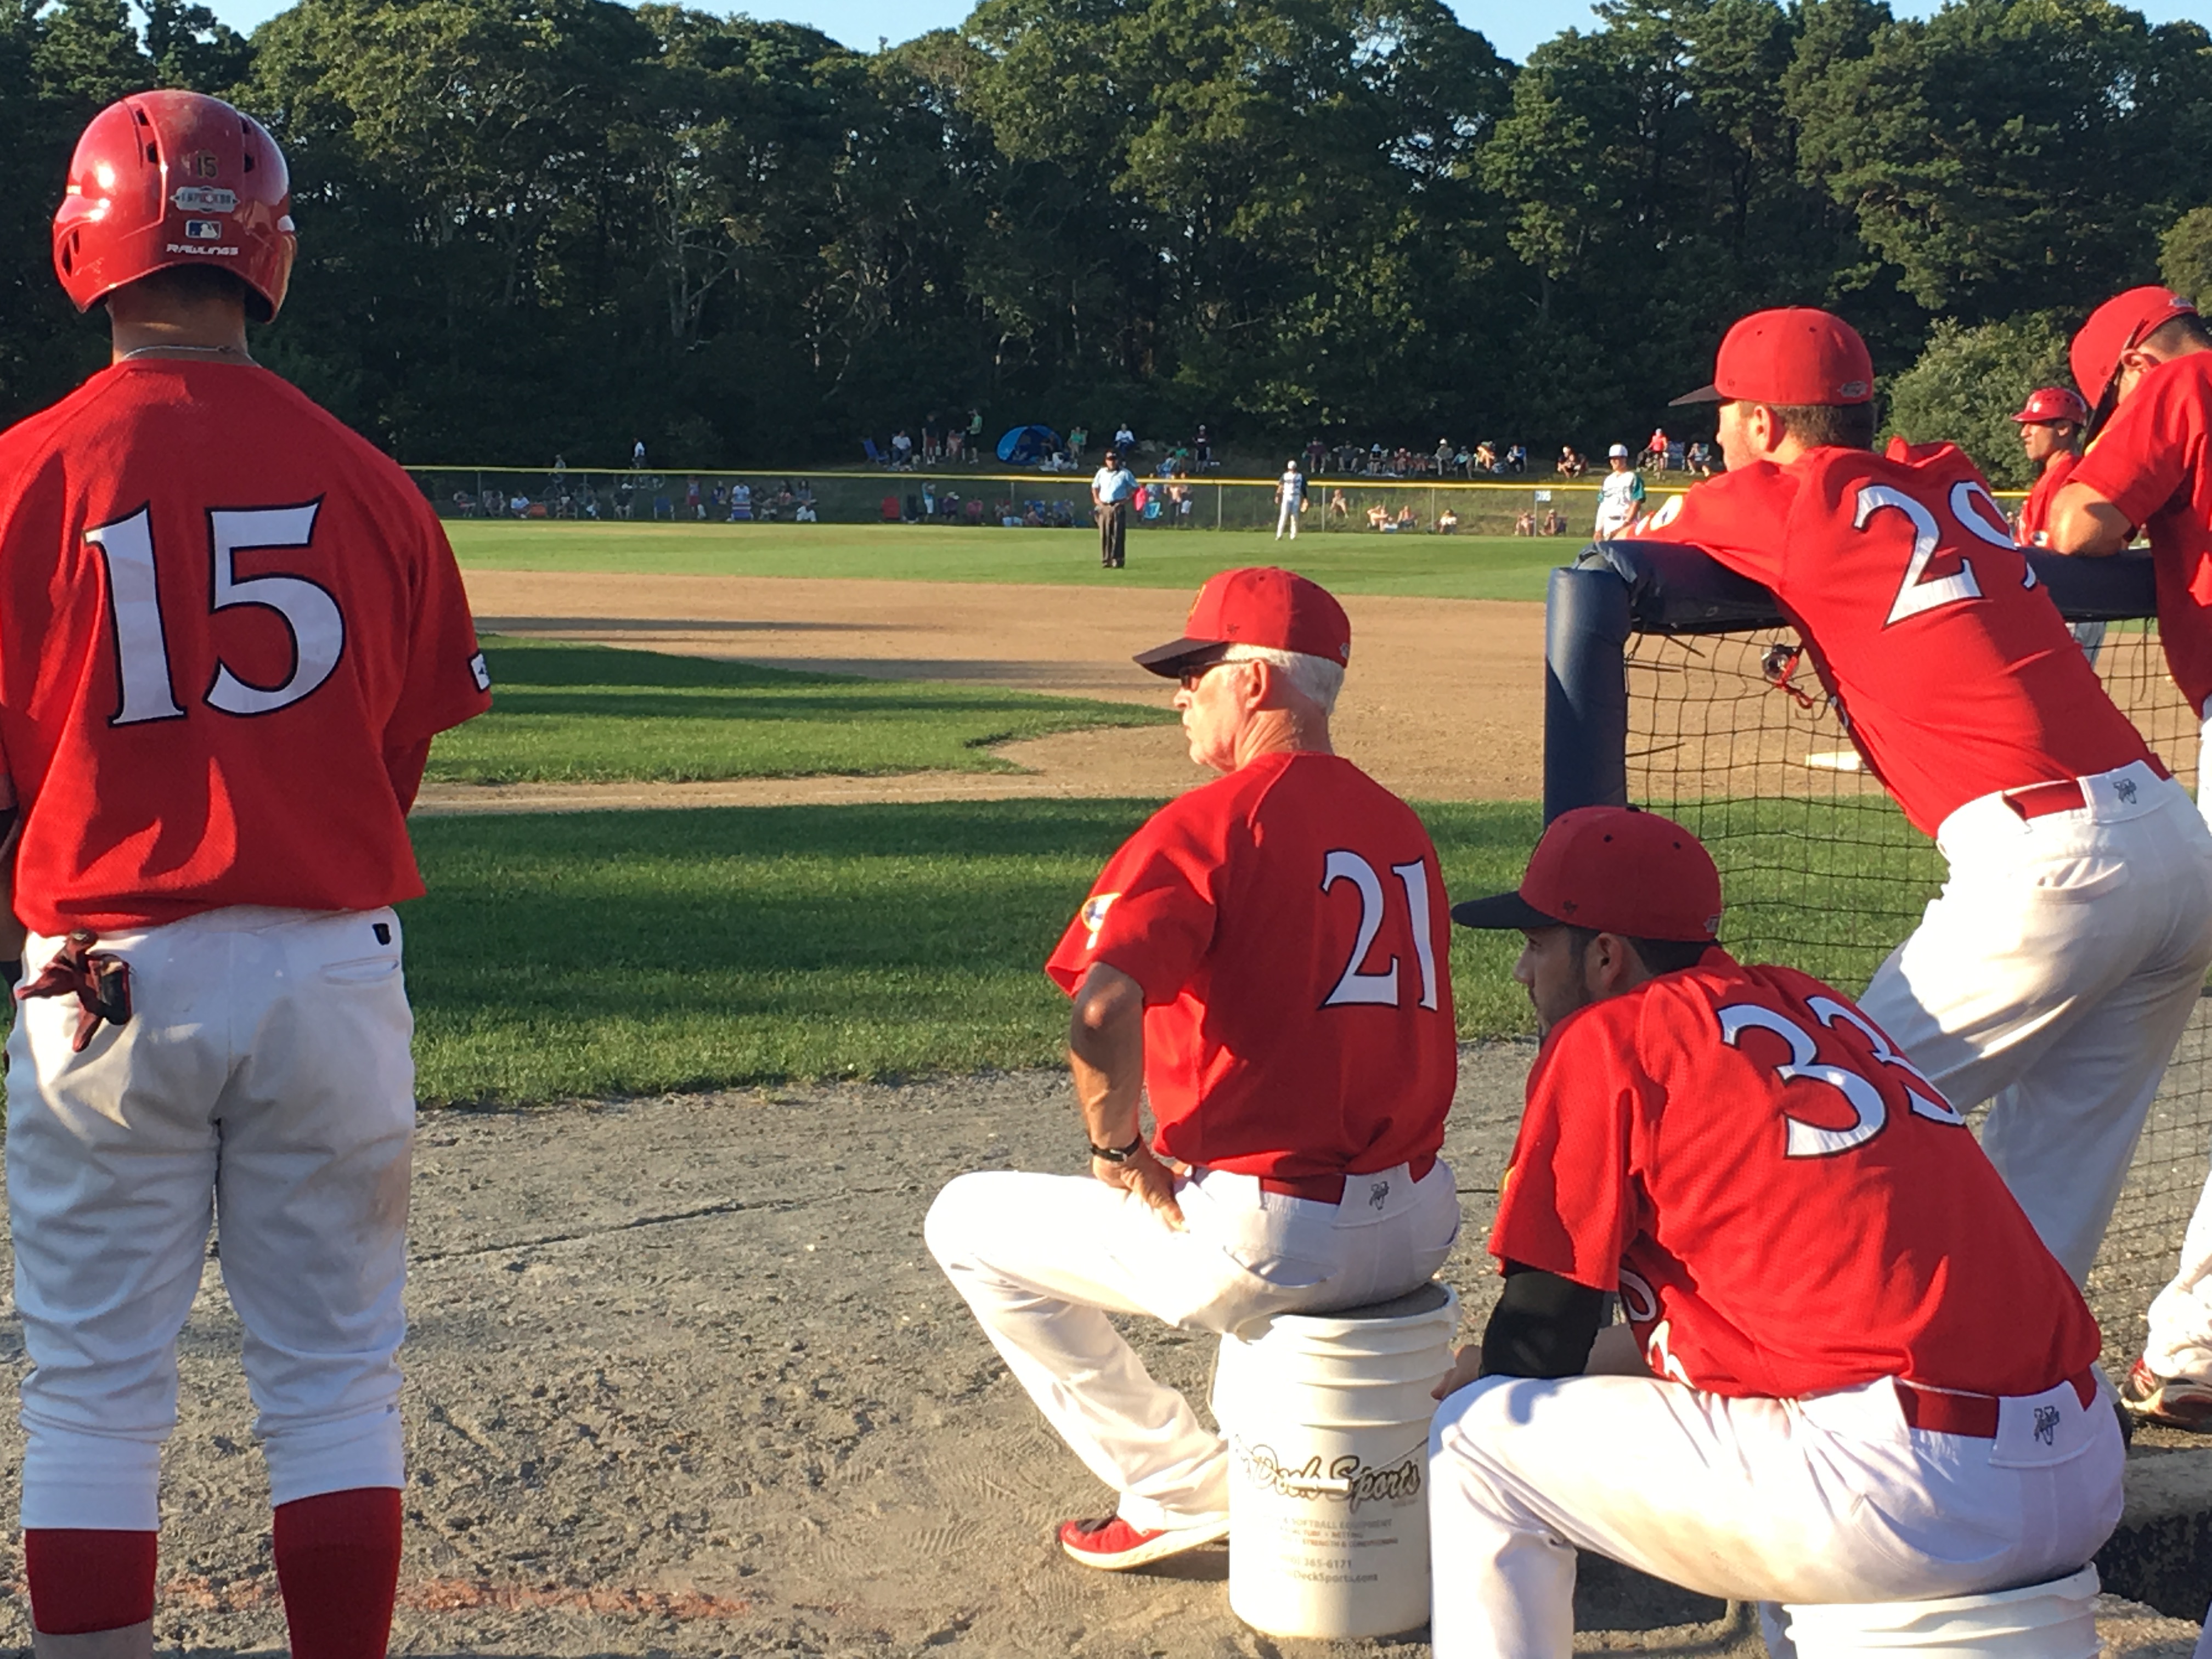 Despite its laidback vibe, the Cape Cod league is serious business for